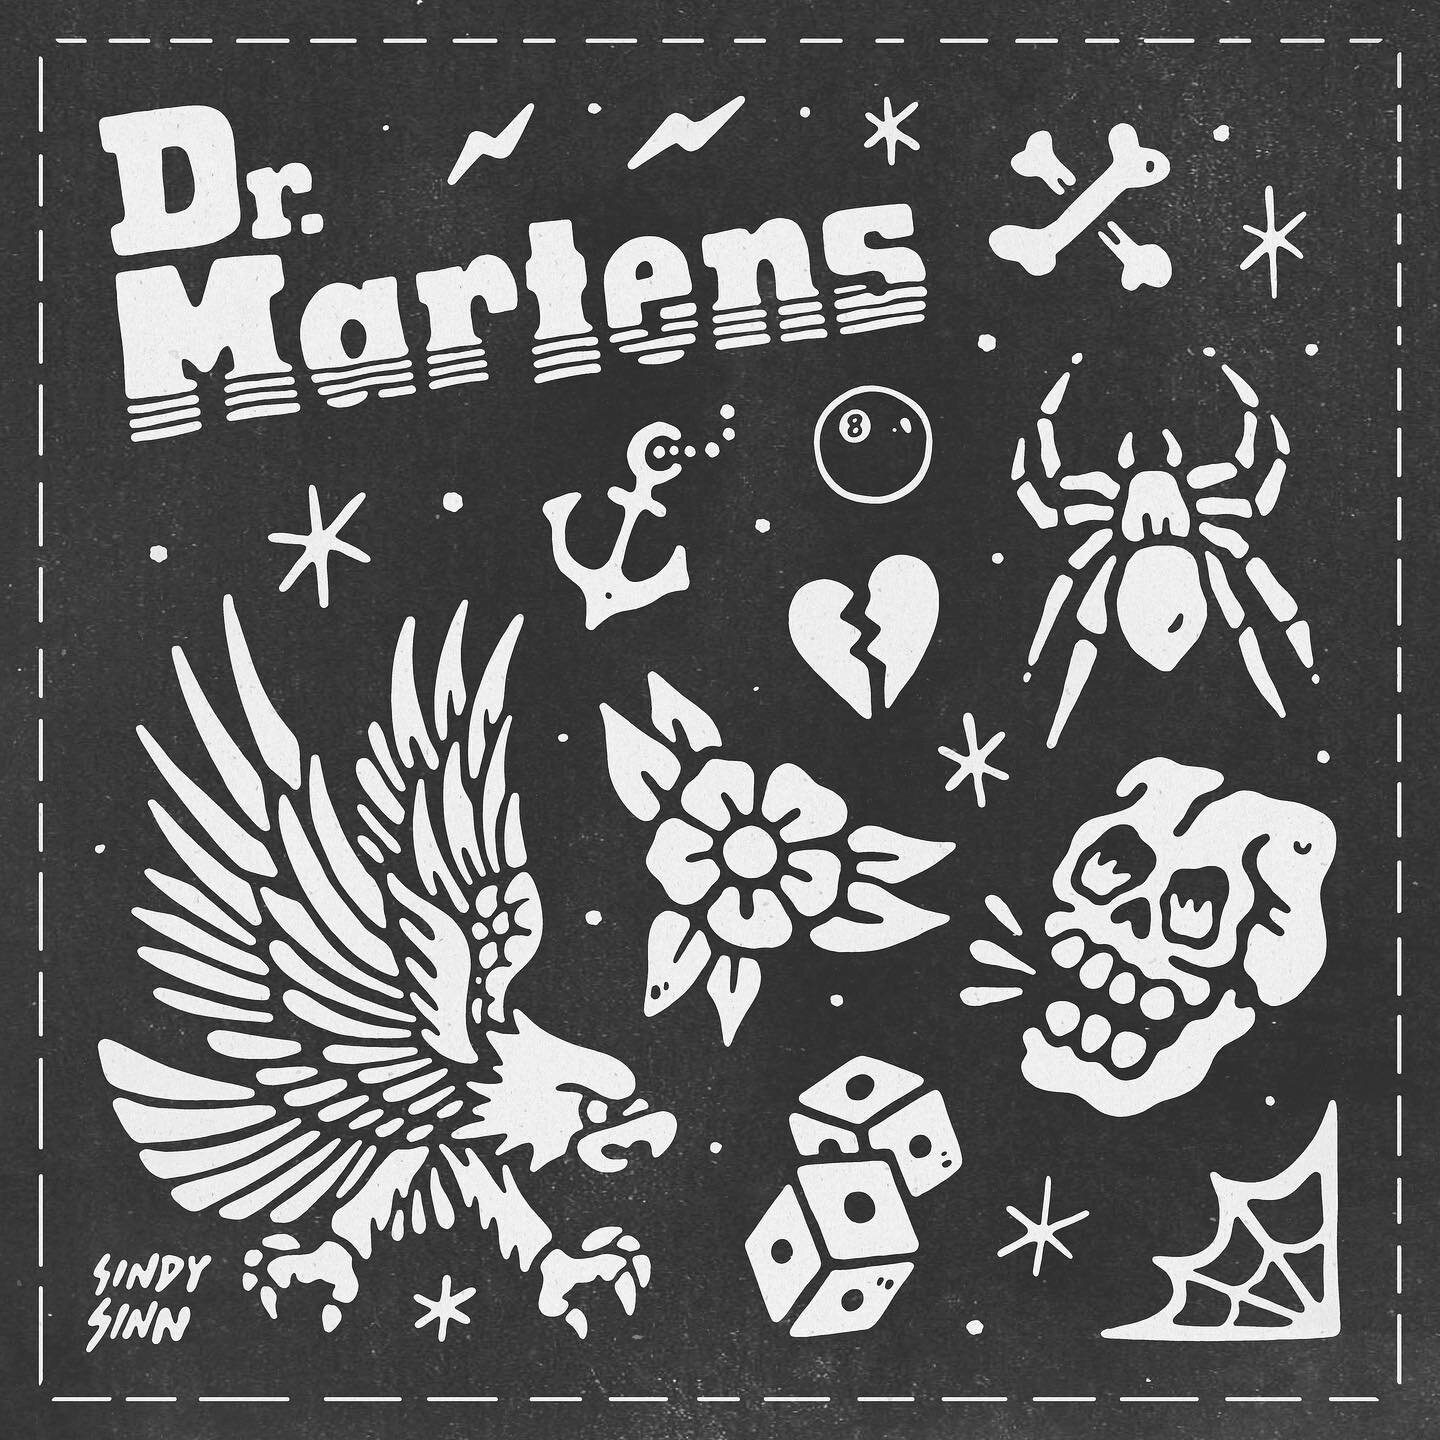 Today I&rsquo;ll be down in World Square hand-painting and customising @drmartensausnz shoes for the opening of their new store. Flash sheet of designs to choose from.
12 til 3pm today and 3 til 6pm tomorrow.
Come down for boots, banter and a billion